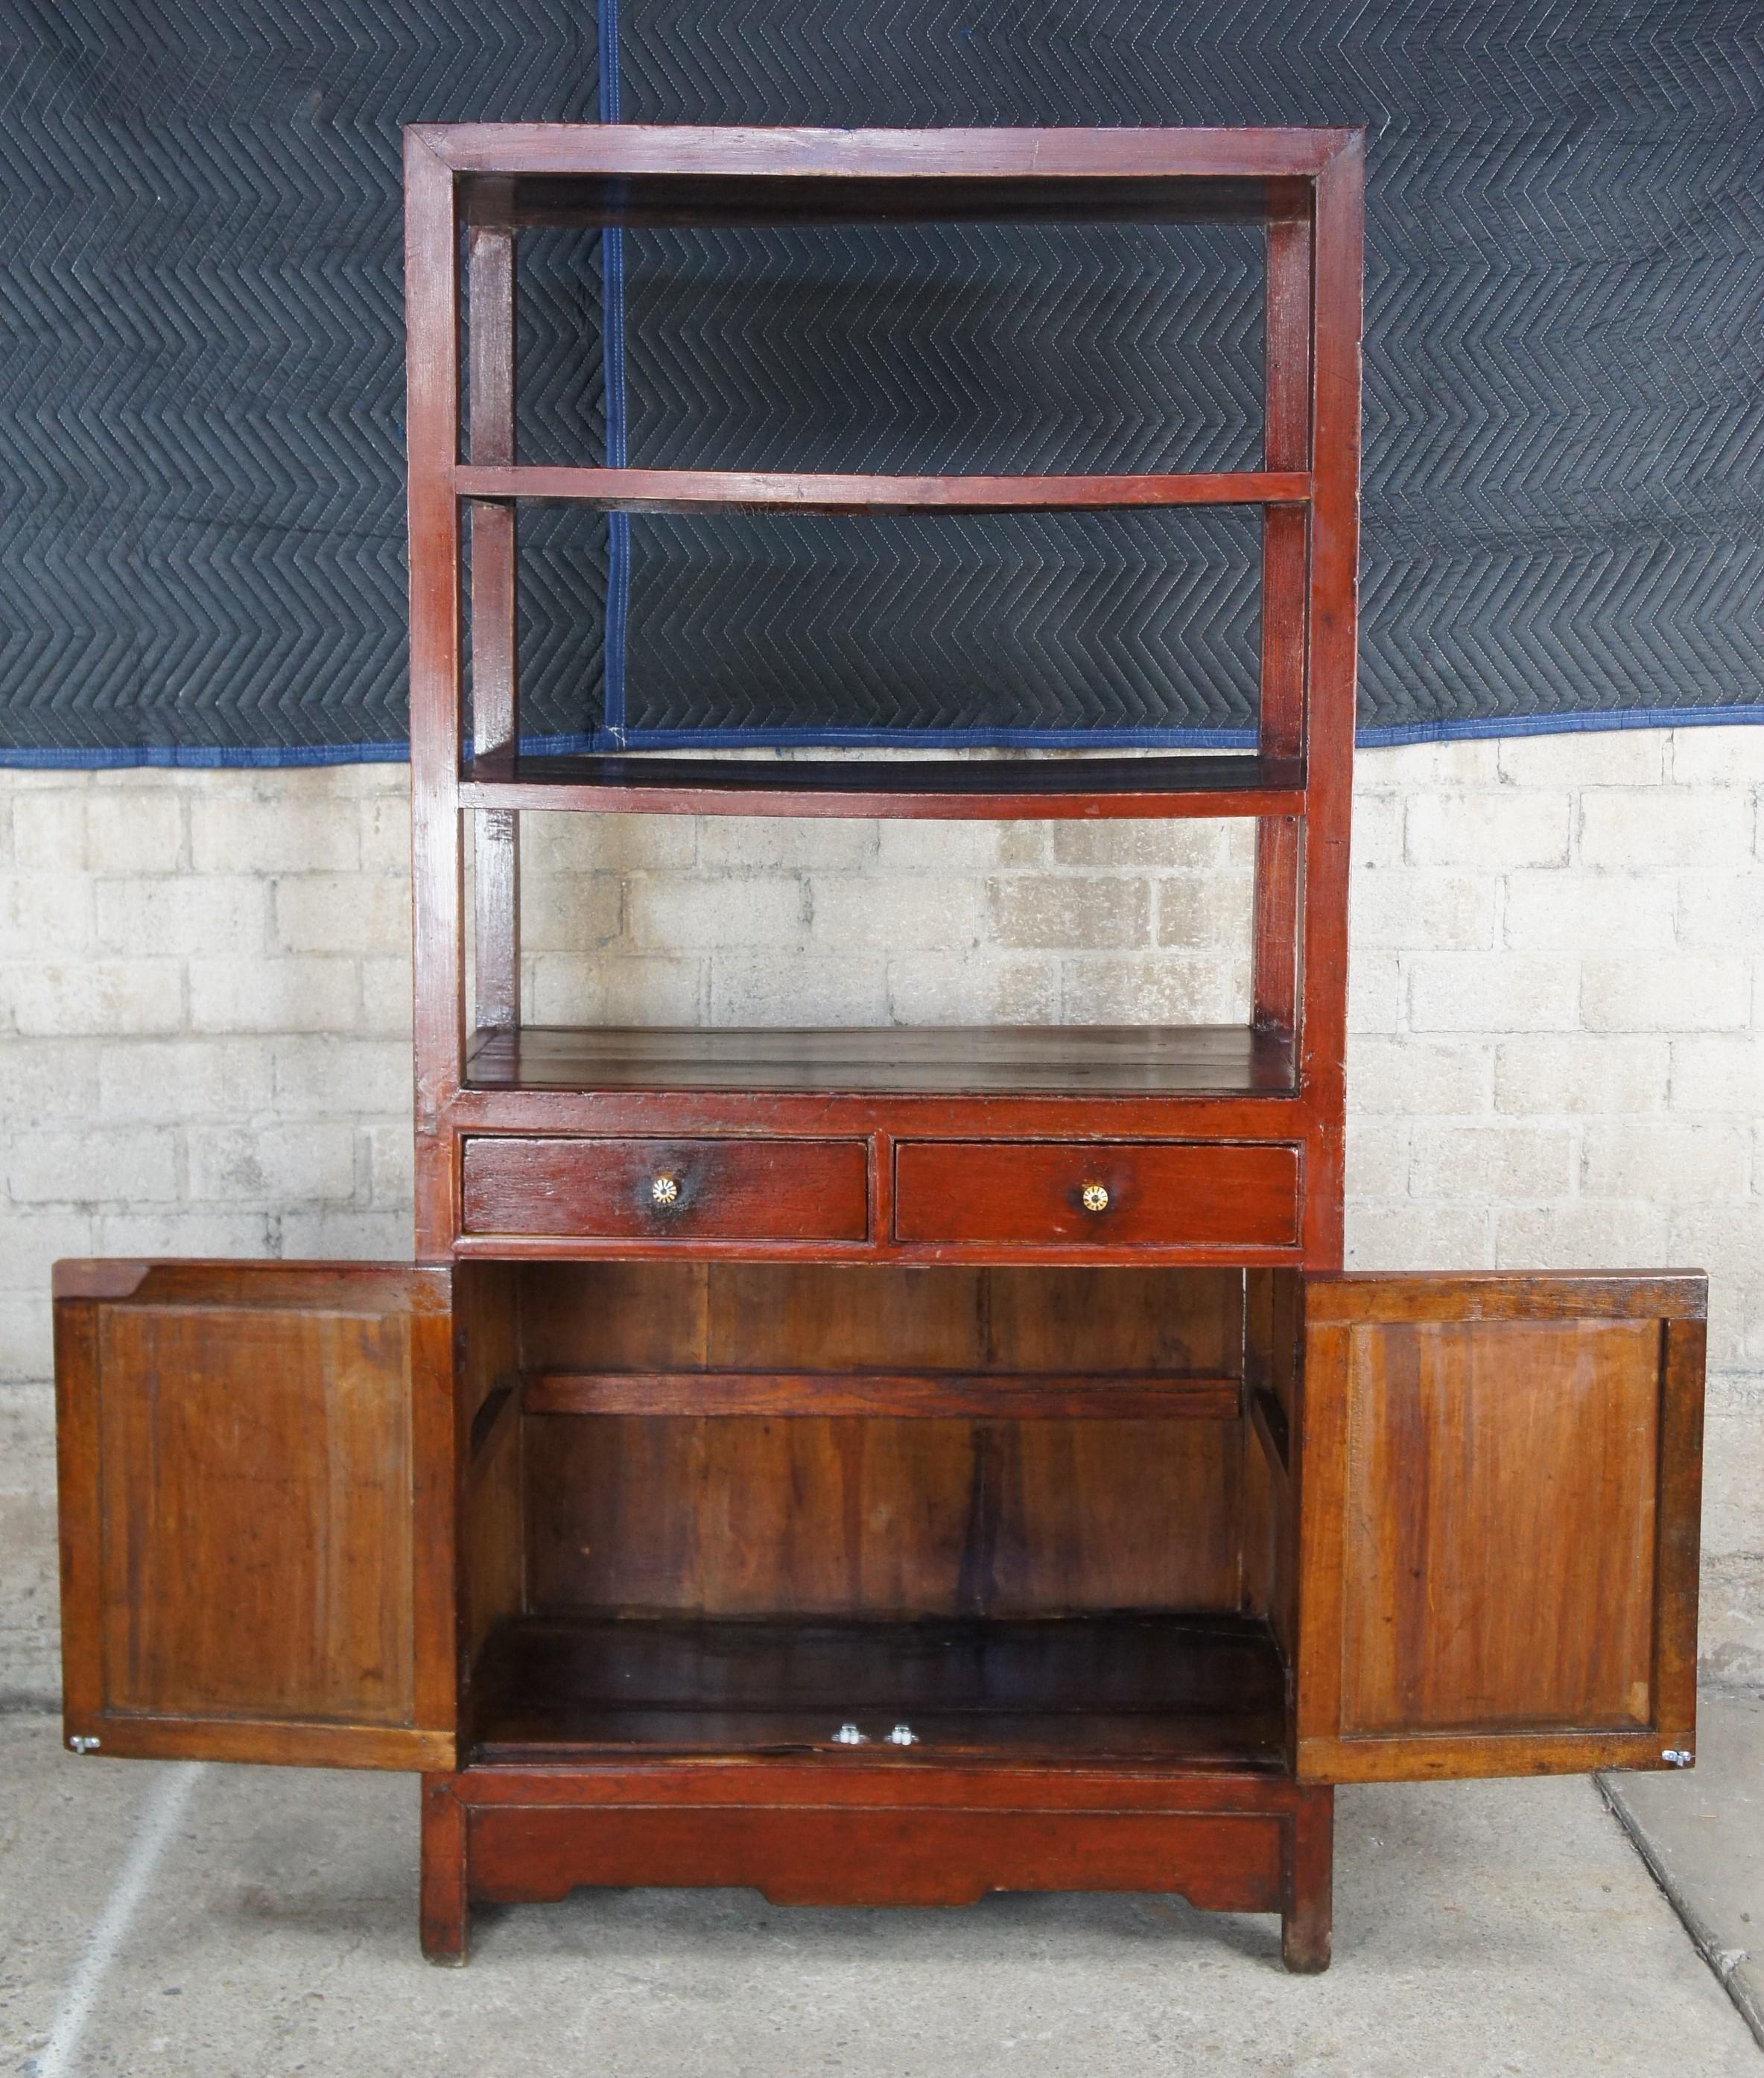 Antique Chinese Lacquered Elm Bookcase Etagere Dry Bar Cabinet Room Divider In Good Condition For Sale In Dayton, OH